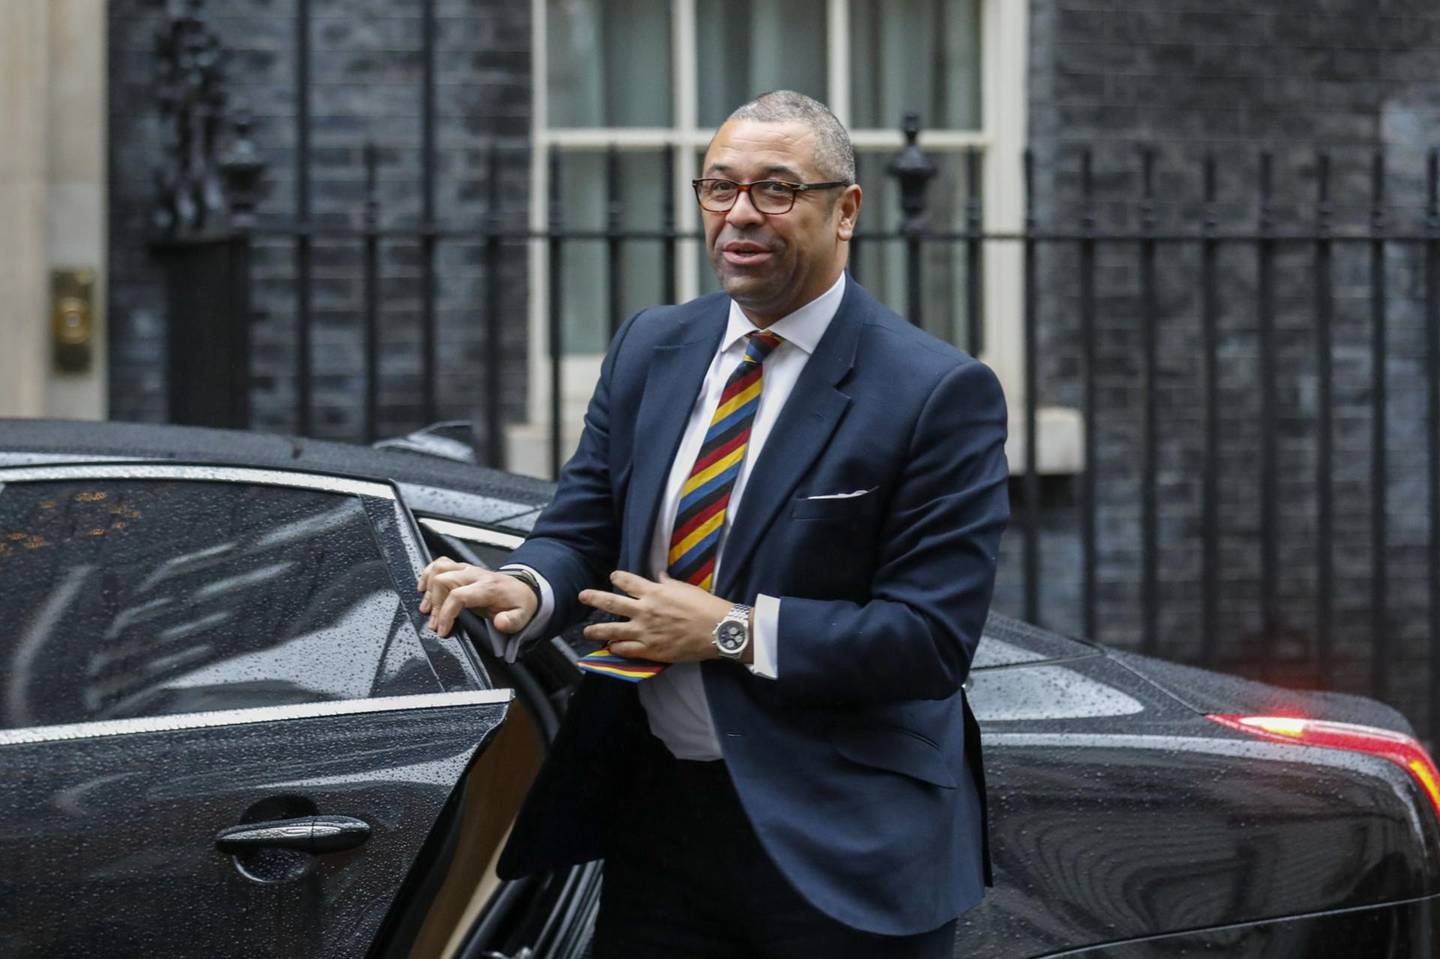 James Cleverly, chairman of the Conservative Party, arrives for a meeting of cabinet minsters at number 10 Downing Street in London, U.K., on Tuesday, Dec. 17, 2019. Boris Johnson will change the law to ensure the Brexit transition phase is not extended, setting up a new cliff-edge for a no-deal split with the European Union at the end of next year. Photographer: Luke MacGregor/Bloomberg